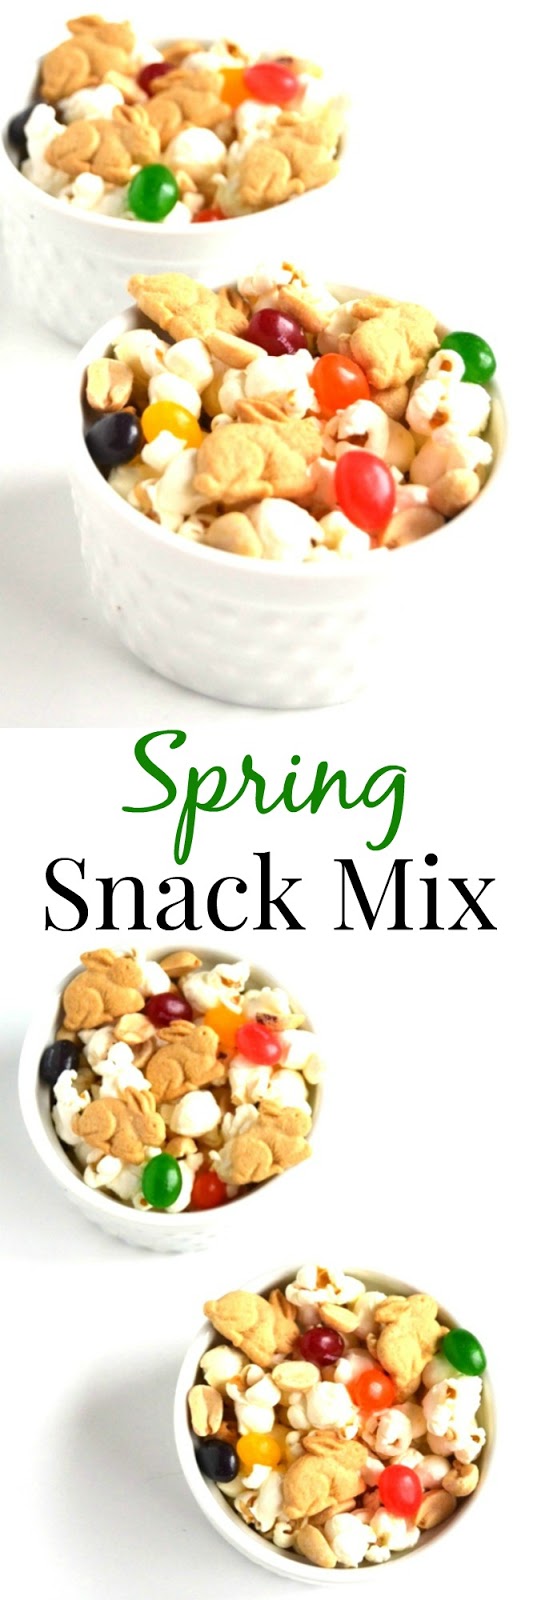 Spring Snack Mix takes 5 minutes to make and can be made with whatever ingredients you have on hand for a fun treat! www.nutritionistreviews.com